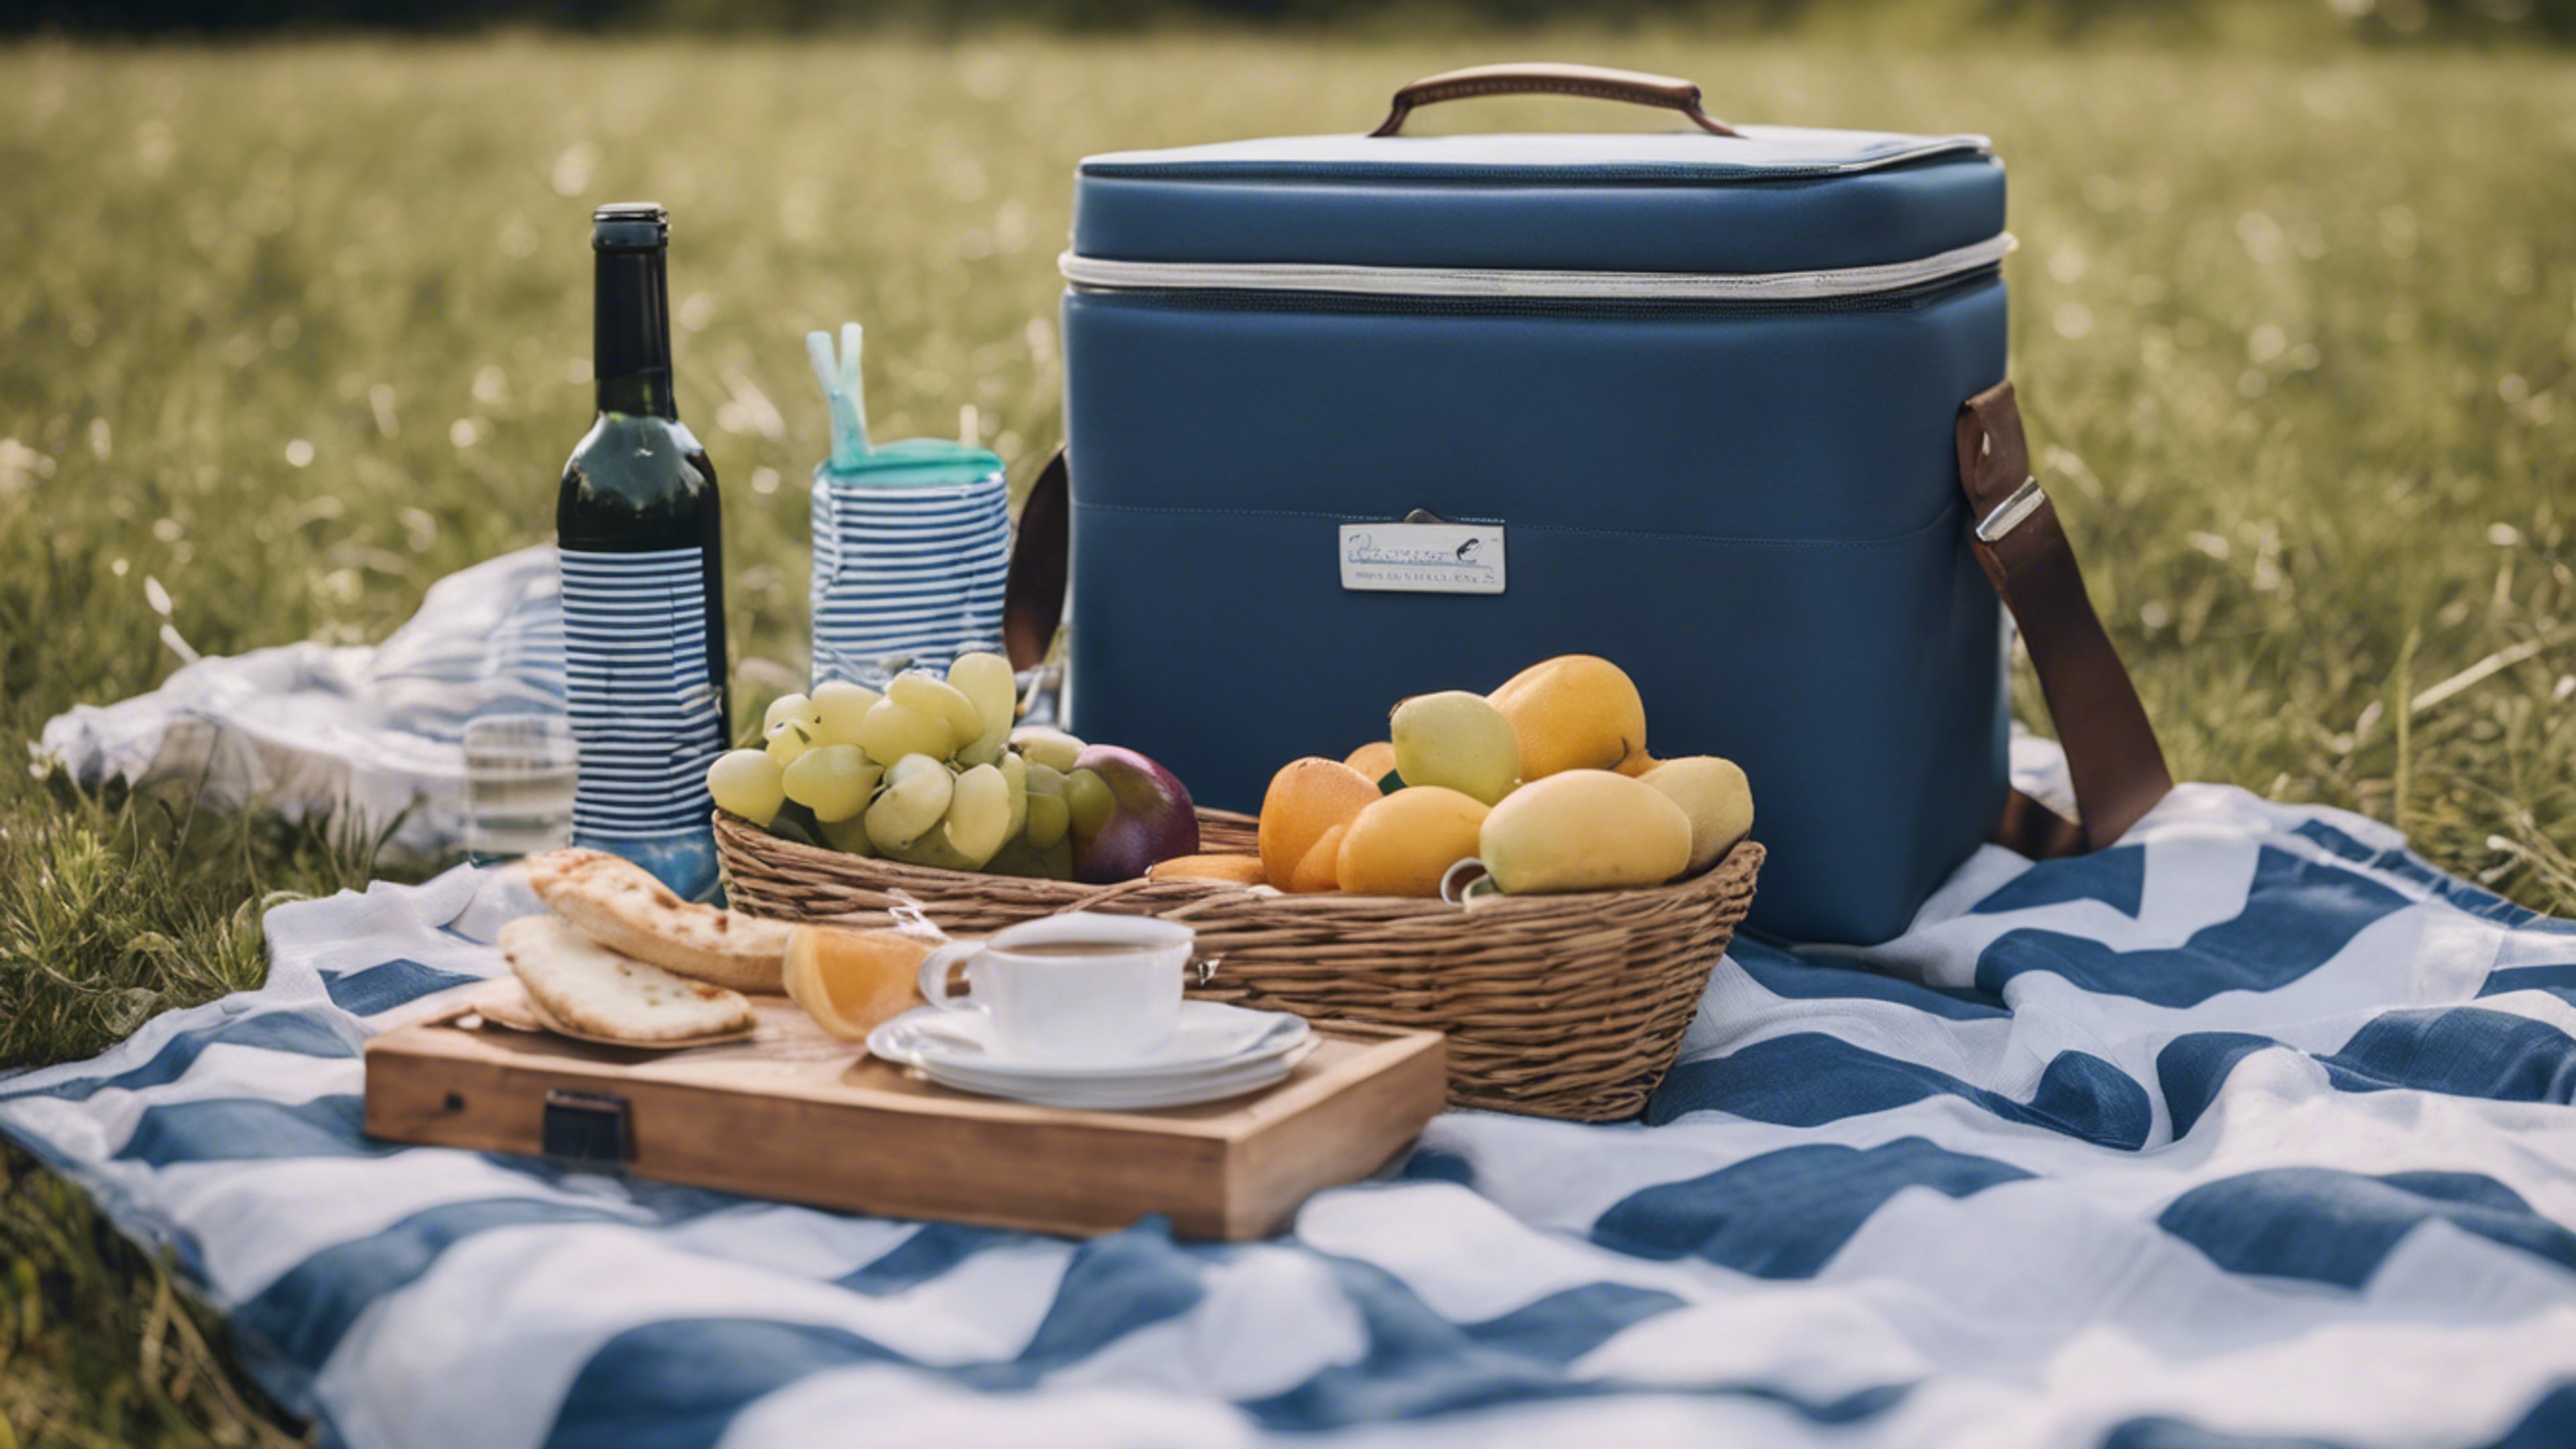 A preppy picnic setup in a grassy meadow, featuring a blue and white striped picnic blanket and matching cooler. Tapeta[2c3aa7a20c924d6f9450]